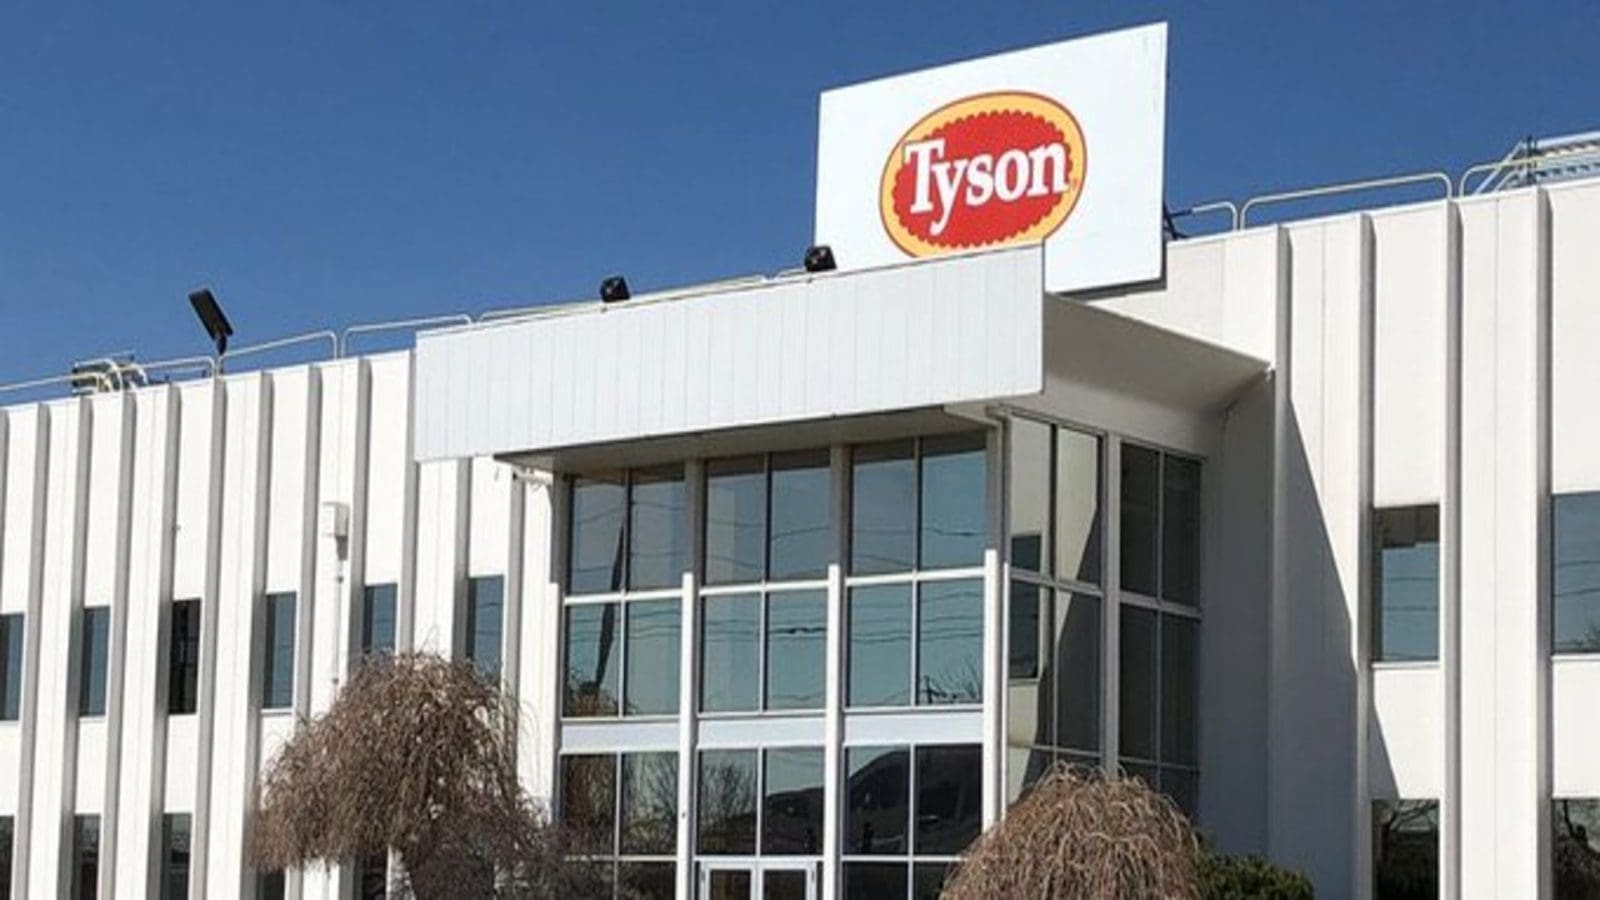 Tyson Foods makes aggressive investments in chicken arm to meet demand  